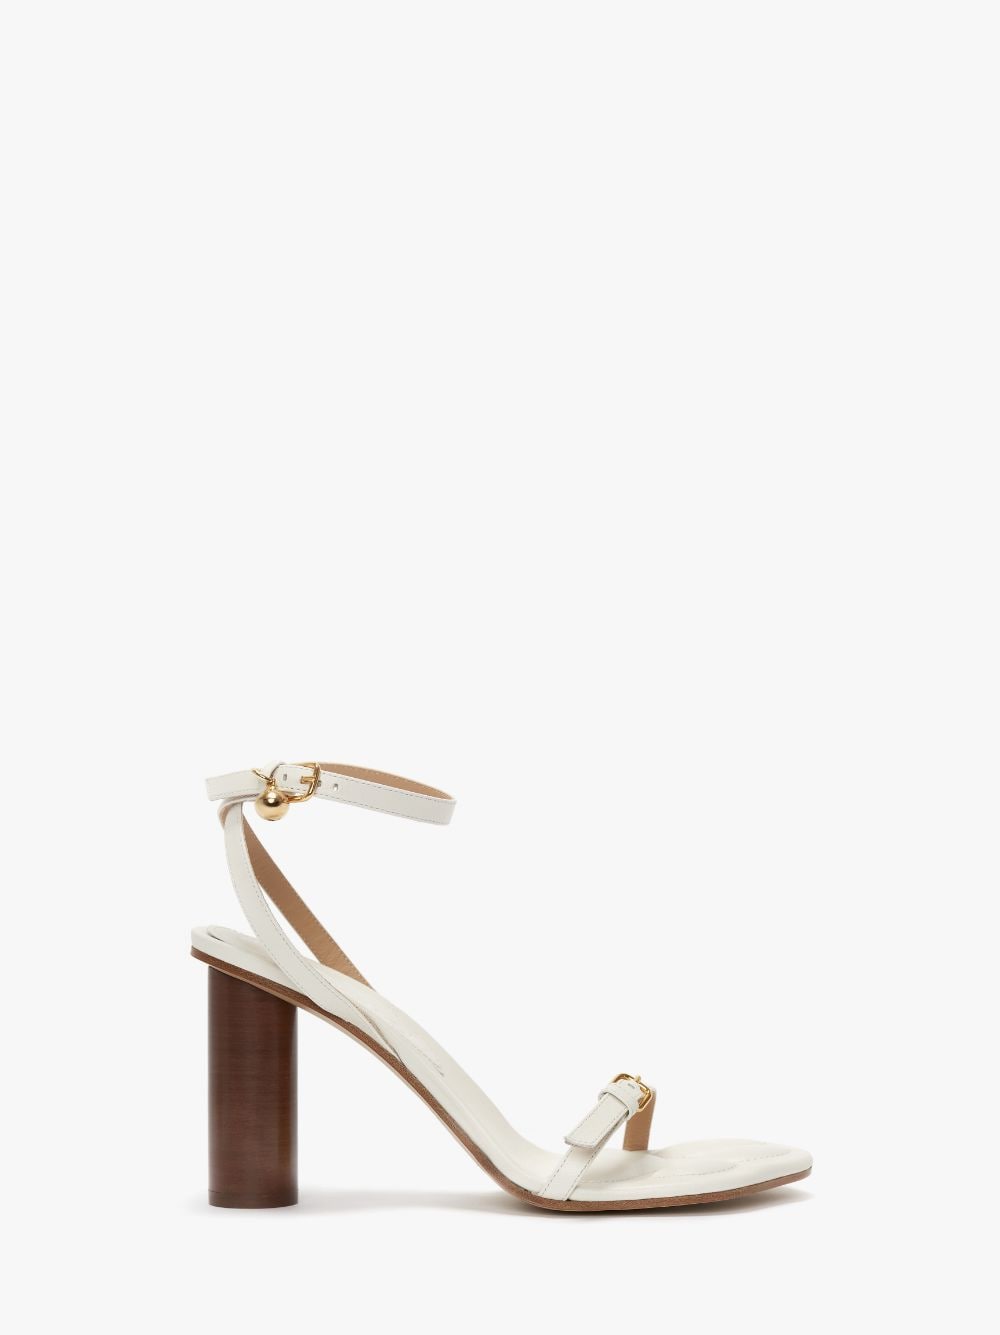 LEATHER PAW HEELED SANDALS in neutrals | JW Anderson US